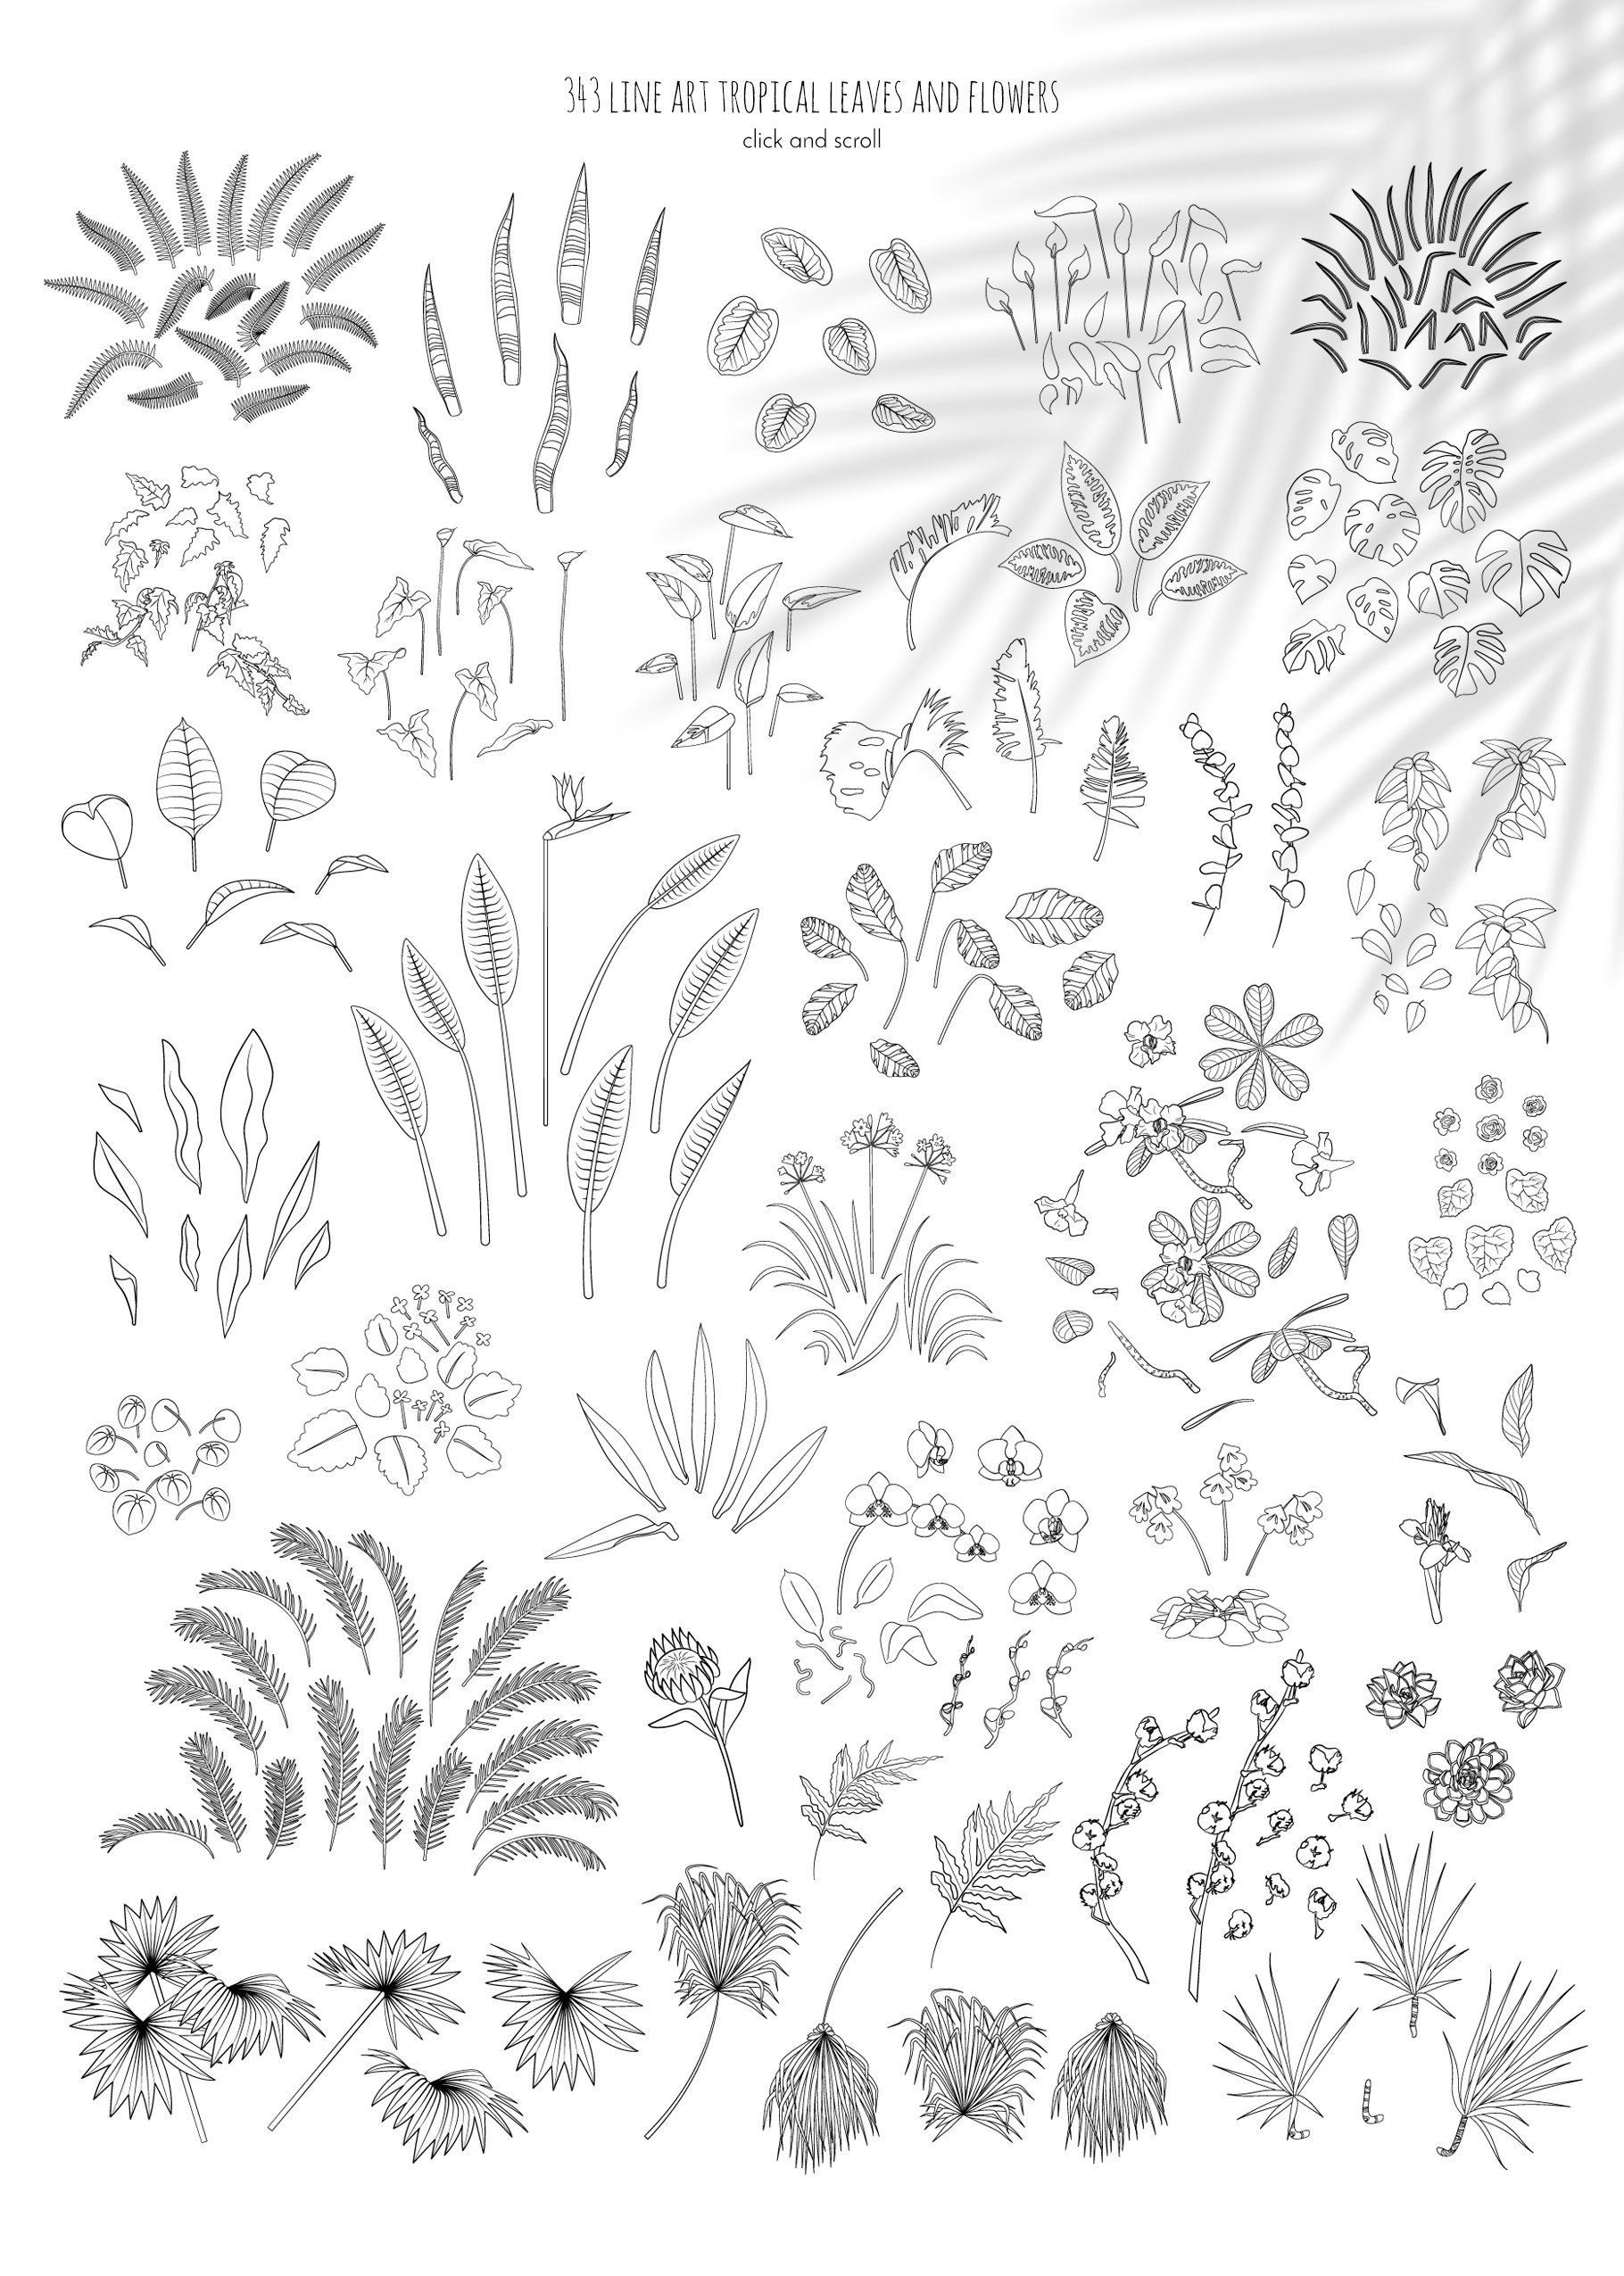 Line art tropical leaves and flowers.